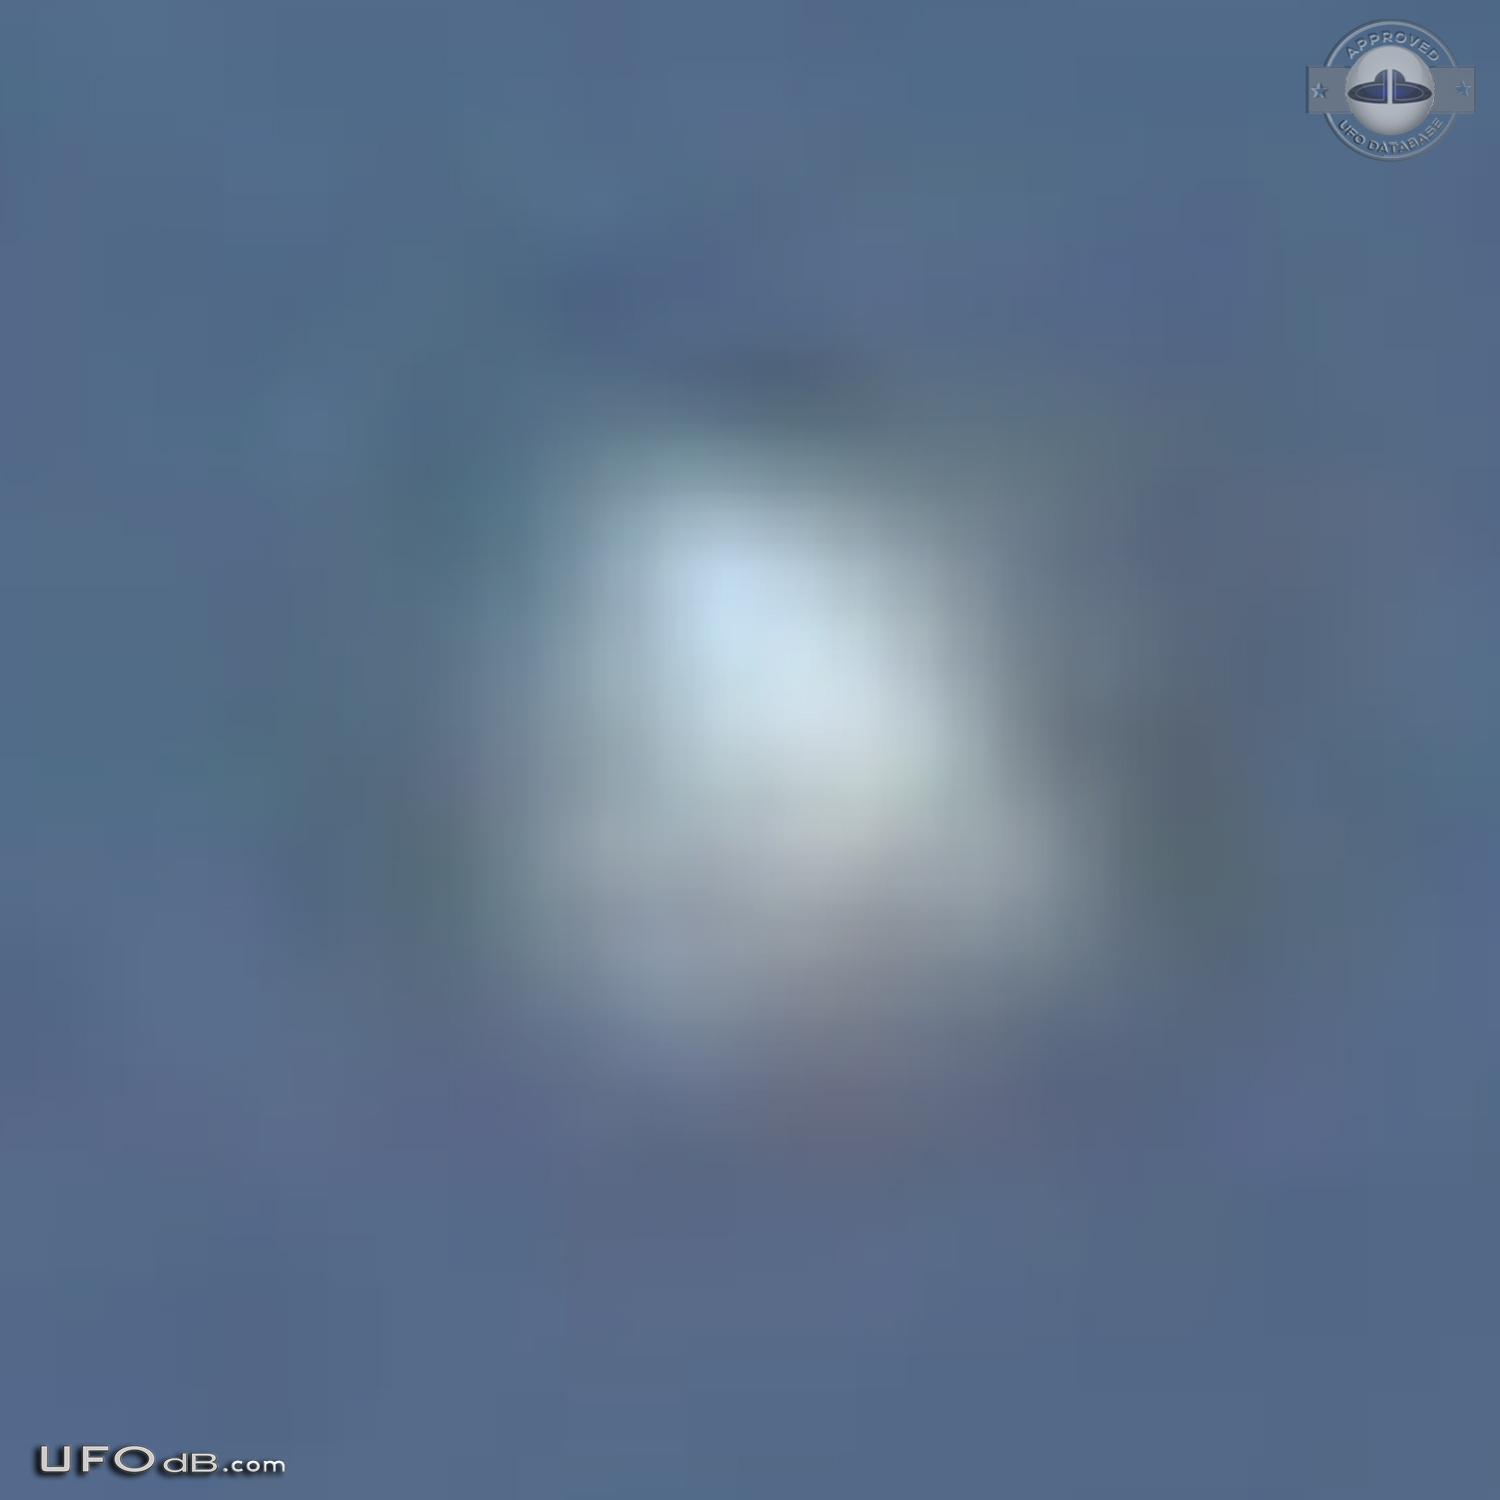 Sphere UFO in bright daylight caught on photo over Vienna Austria 2011 UFO Picture #494-4